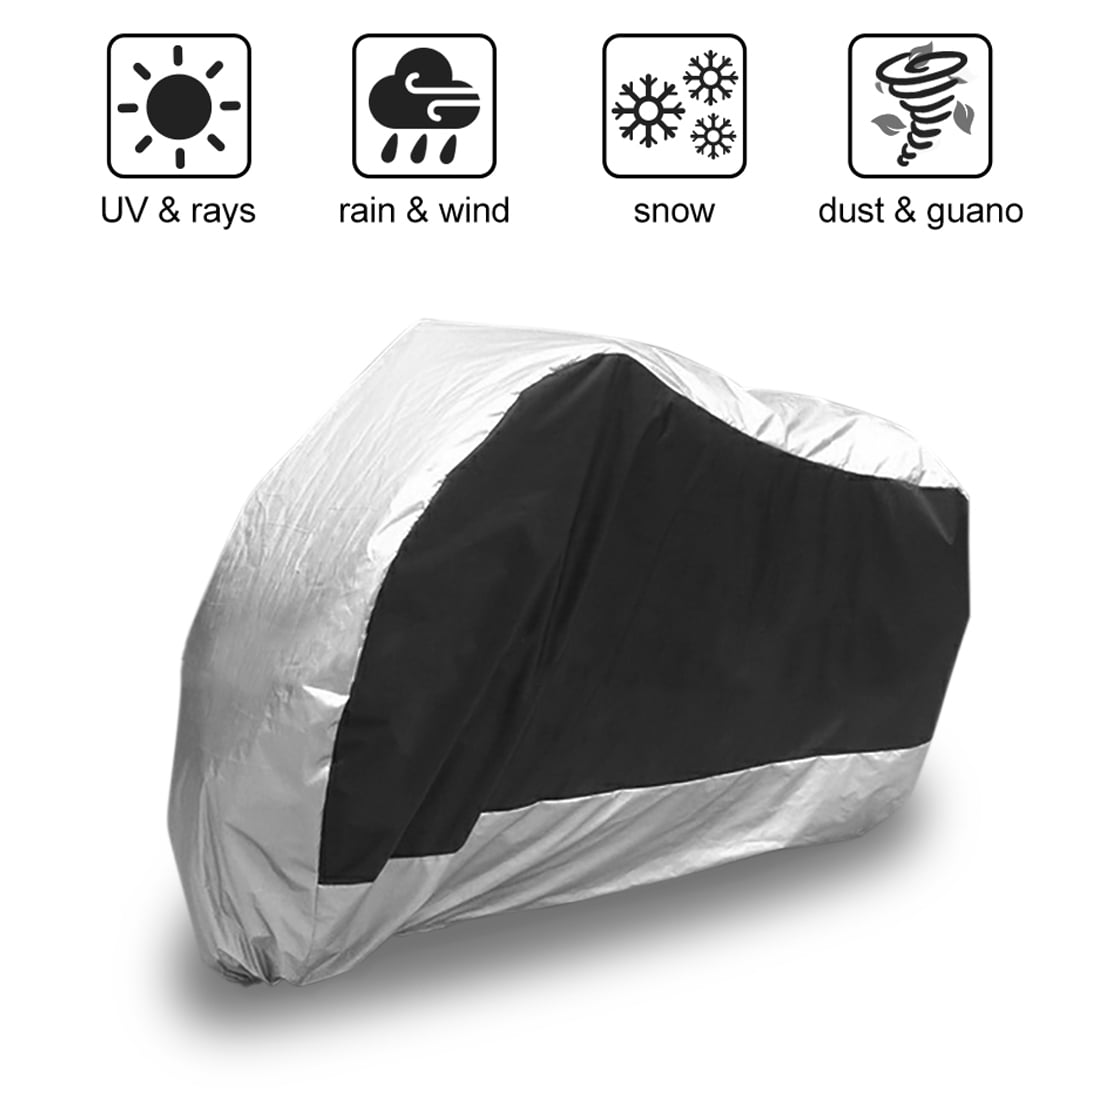 XXXL Heavy Duty Motorcycle Rain Cover For Harley Davidson Electra Glide Classic 